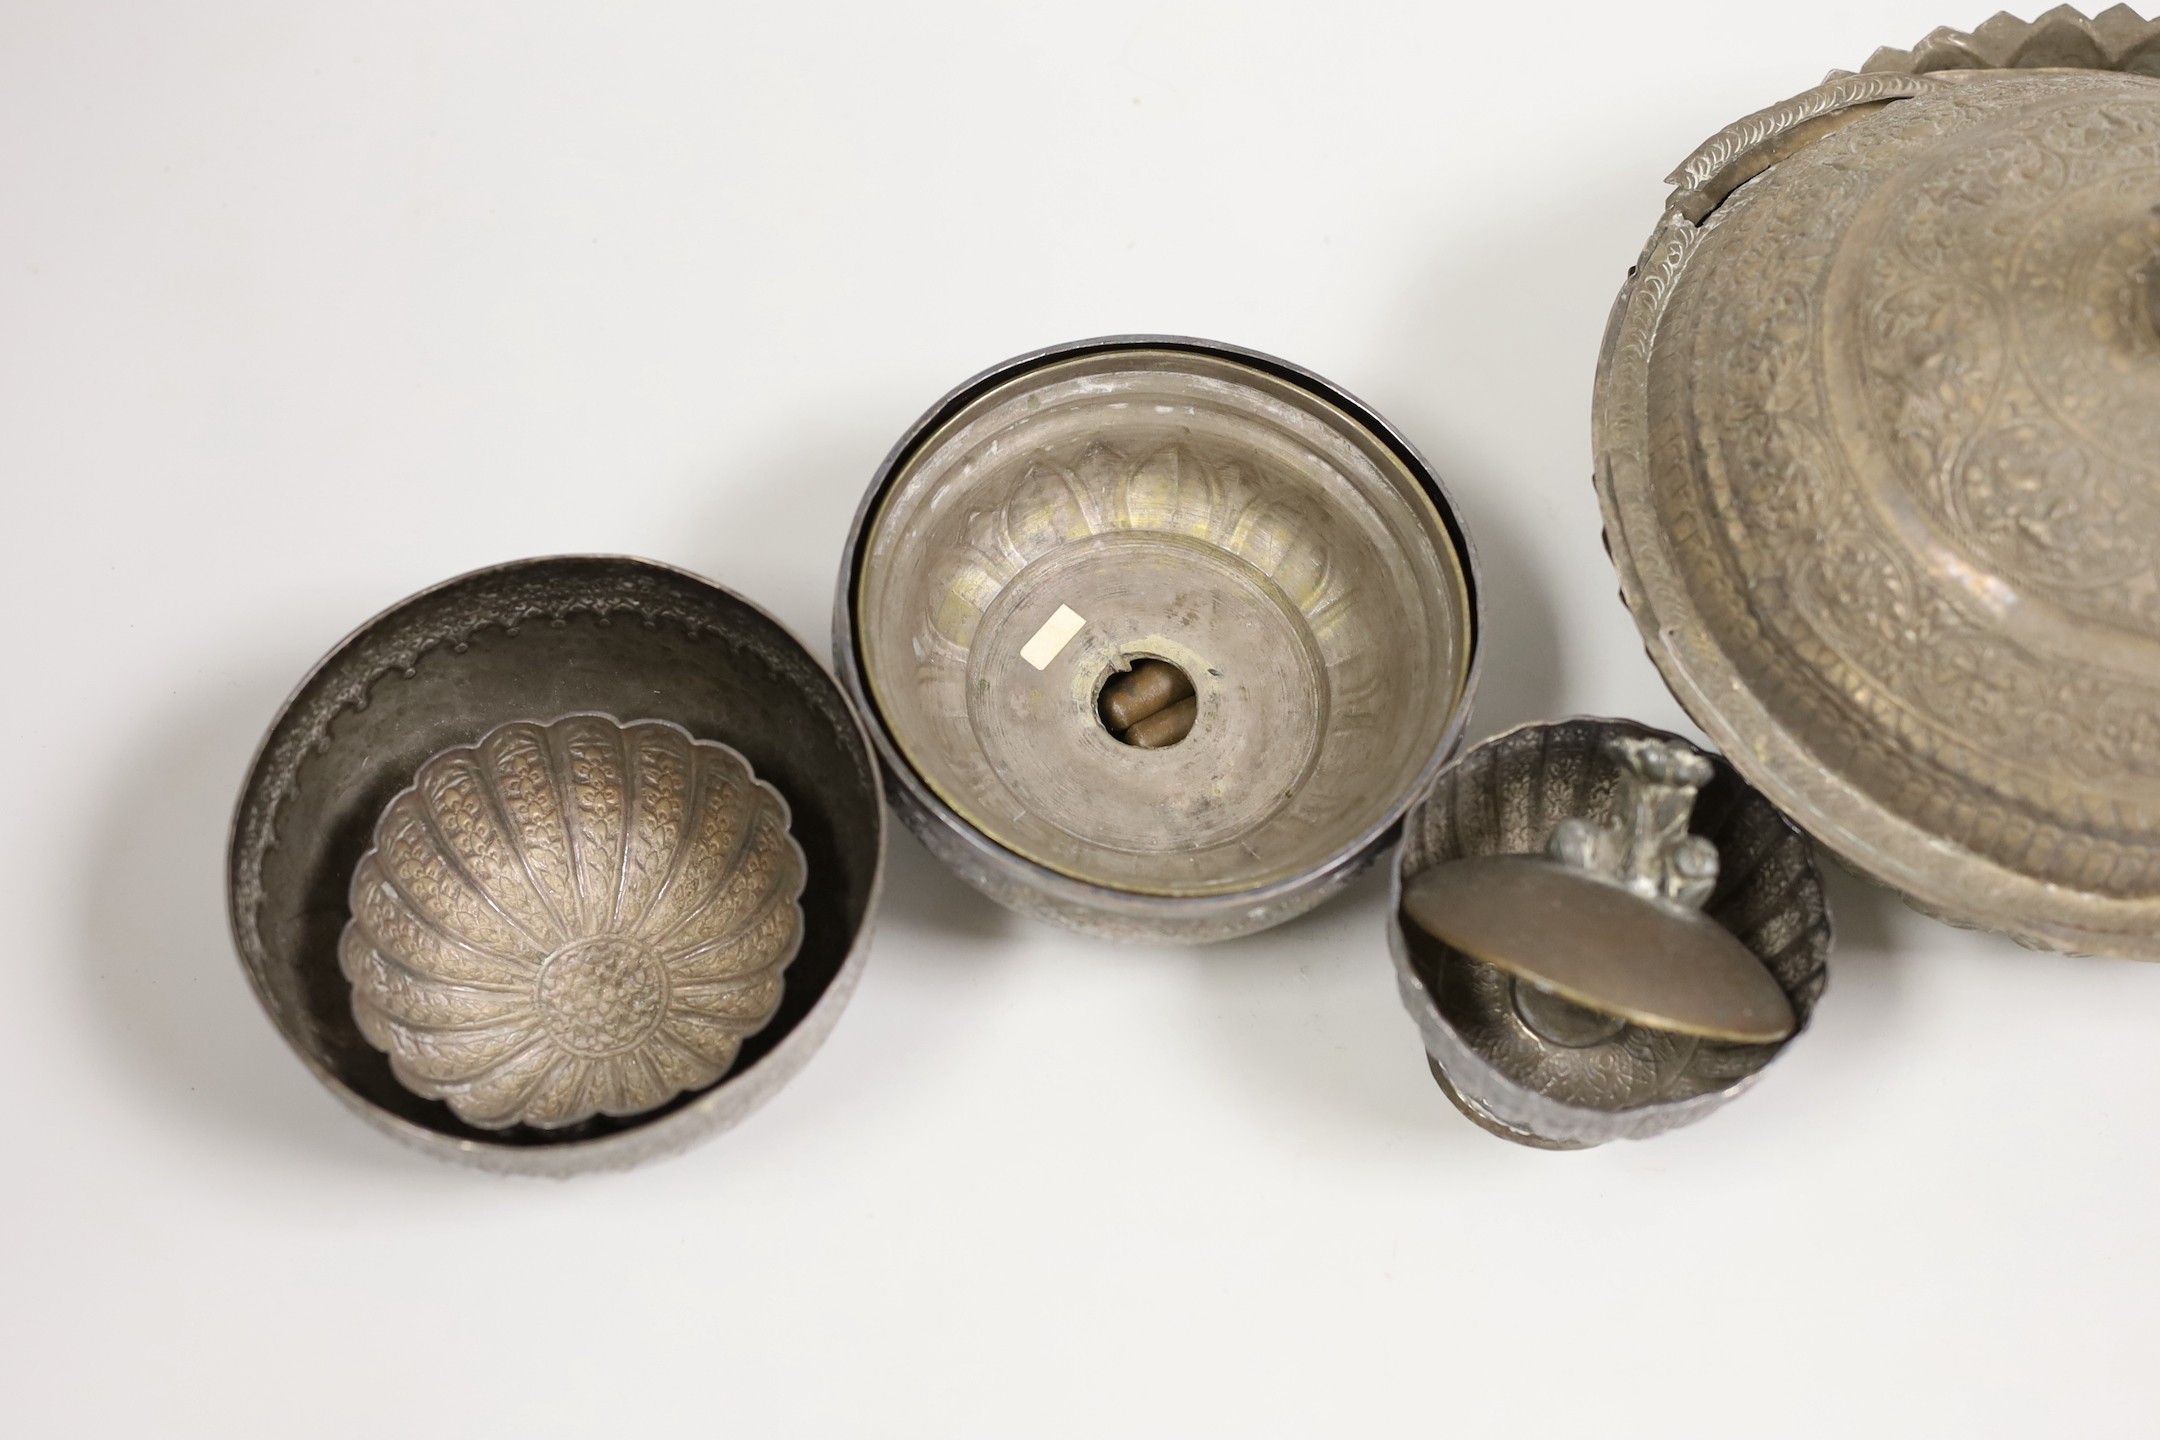 A Malay Straits pedestal bowl and cover or 'Batil Ber Tutop' (a.f.), three Malay Straits white metal betel nut cups and two similar small bowls, all with embossed floral or foliate designs (one cup with green enamelled d